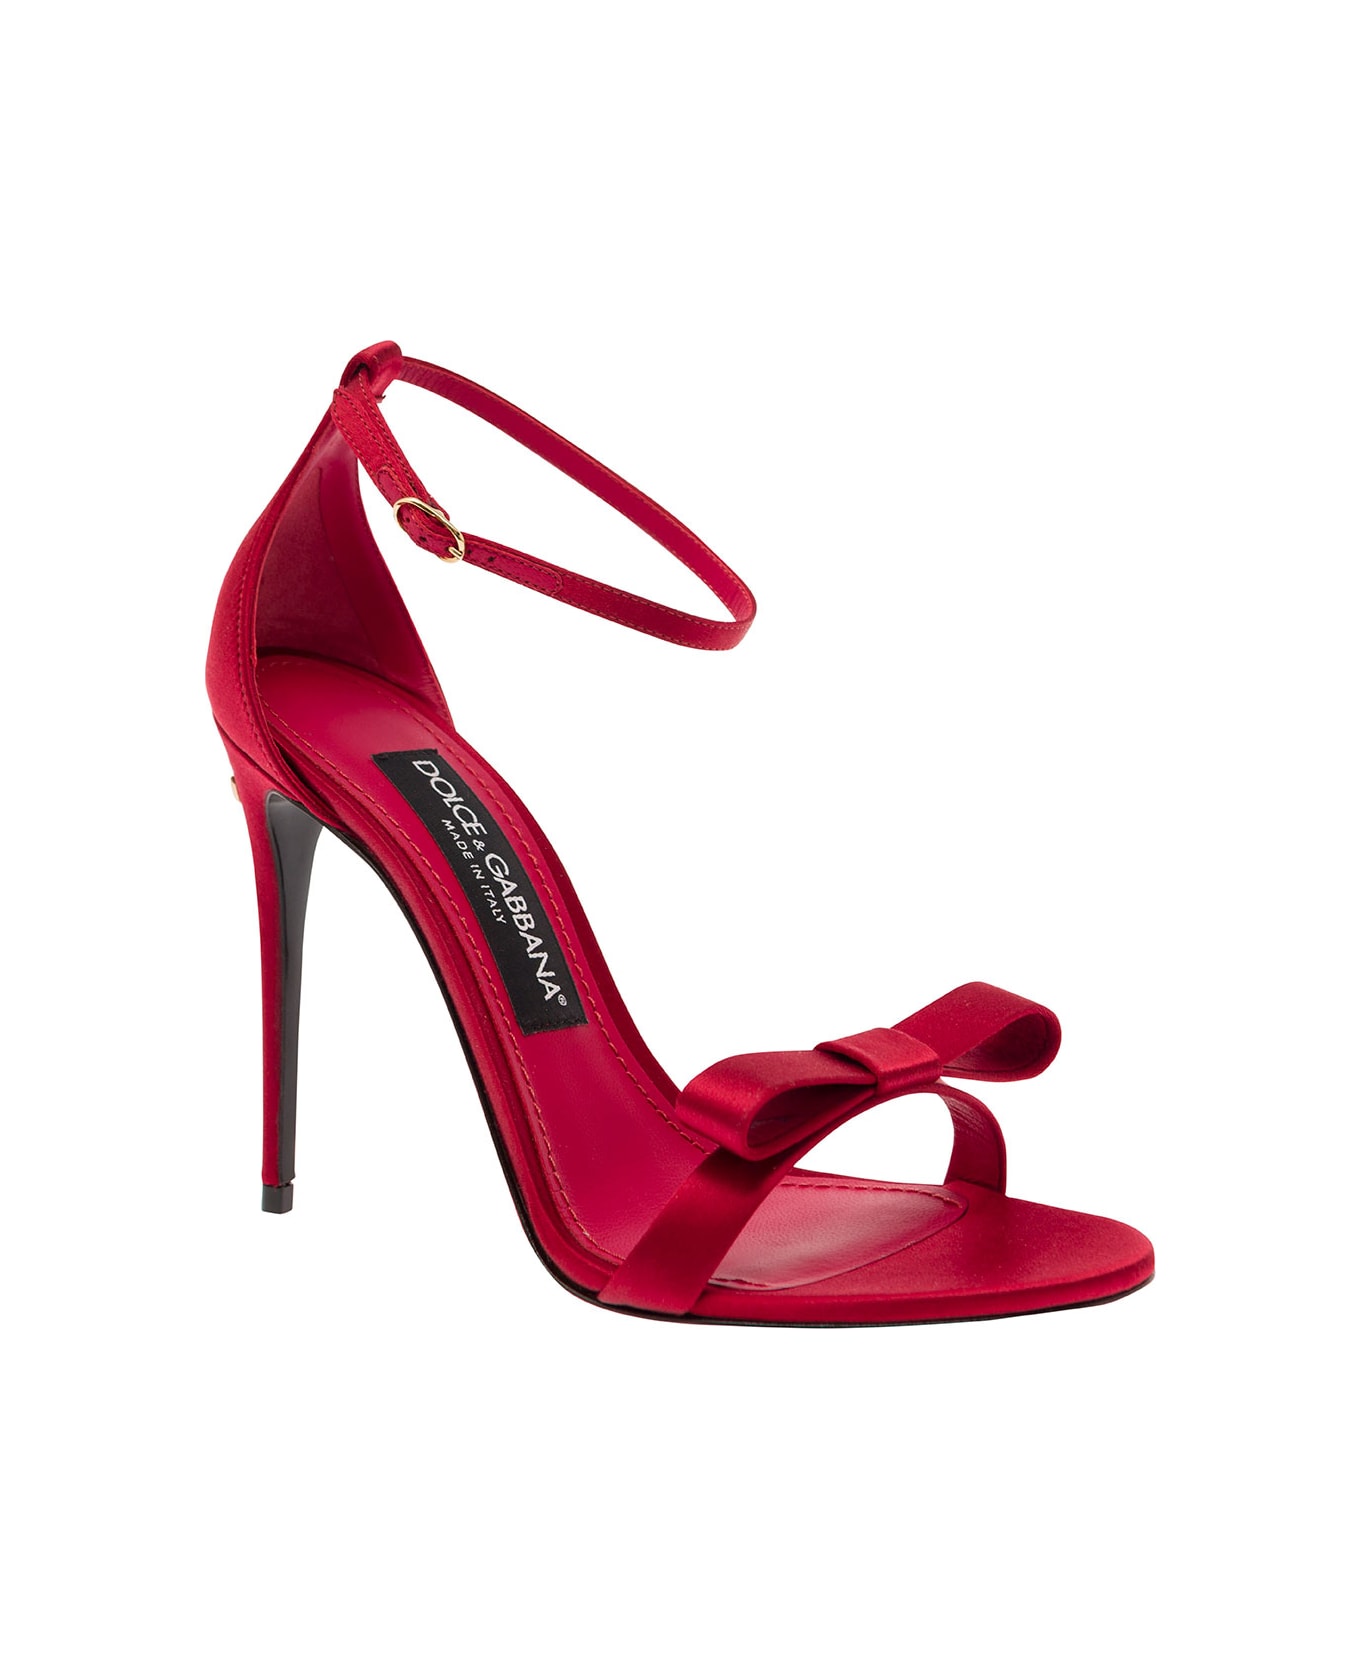 Dolce & Gabbana Red Sandals With Bow And Logo Detail In Satin Woman - Red